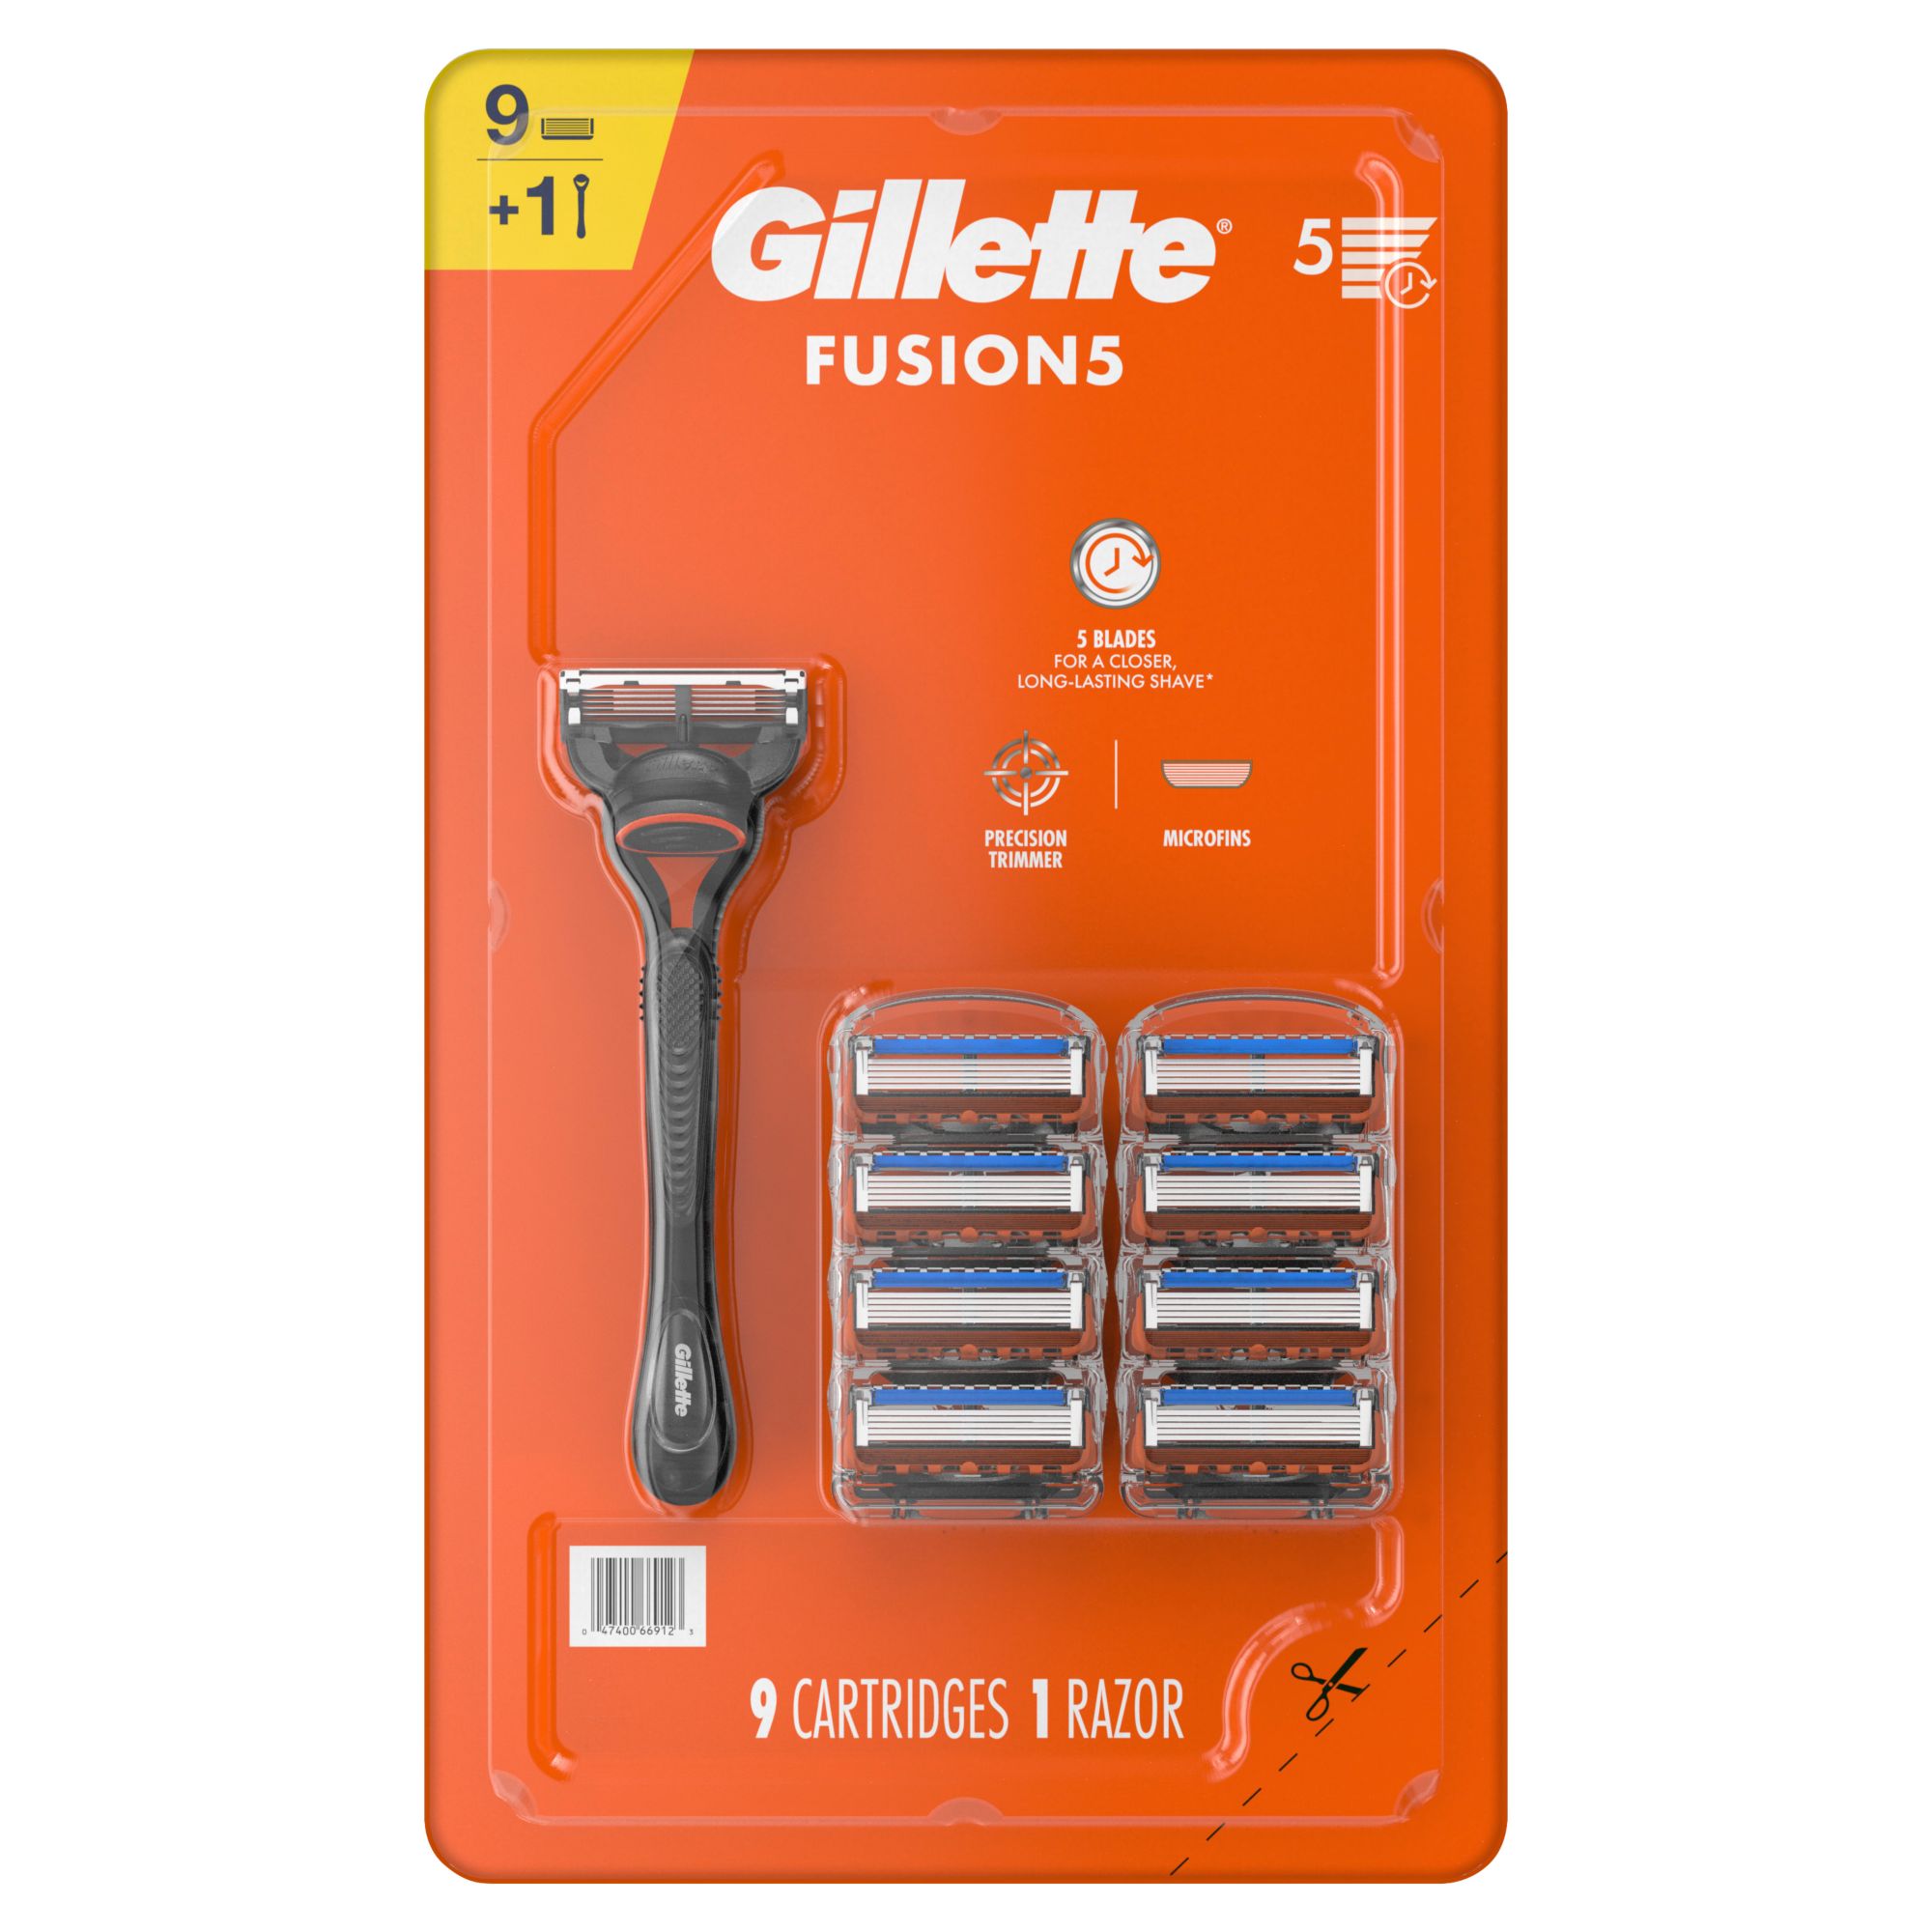 Gillette Mach3 Charcoal Shaving Razor - For Men, New Enhanced Lubrastrip,  For A Clean Close Shave, 1 pc